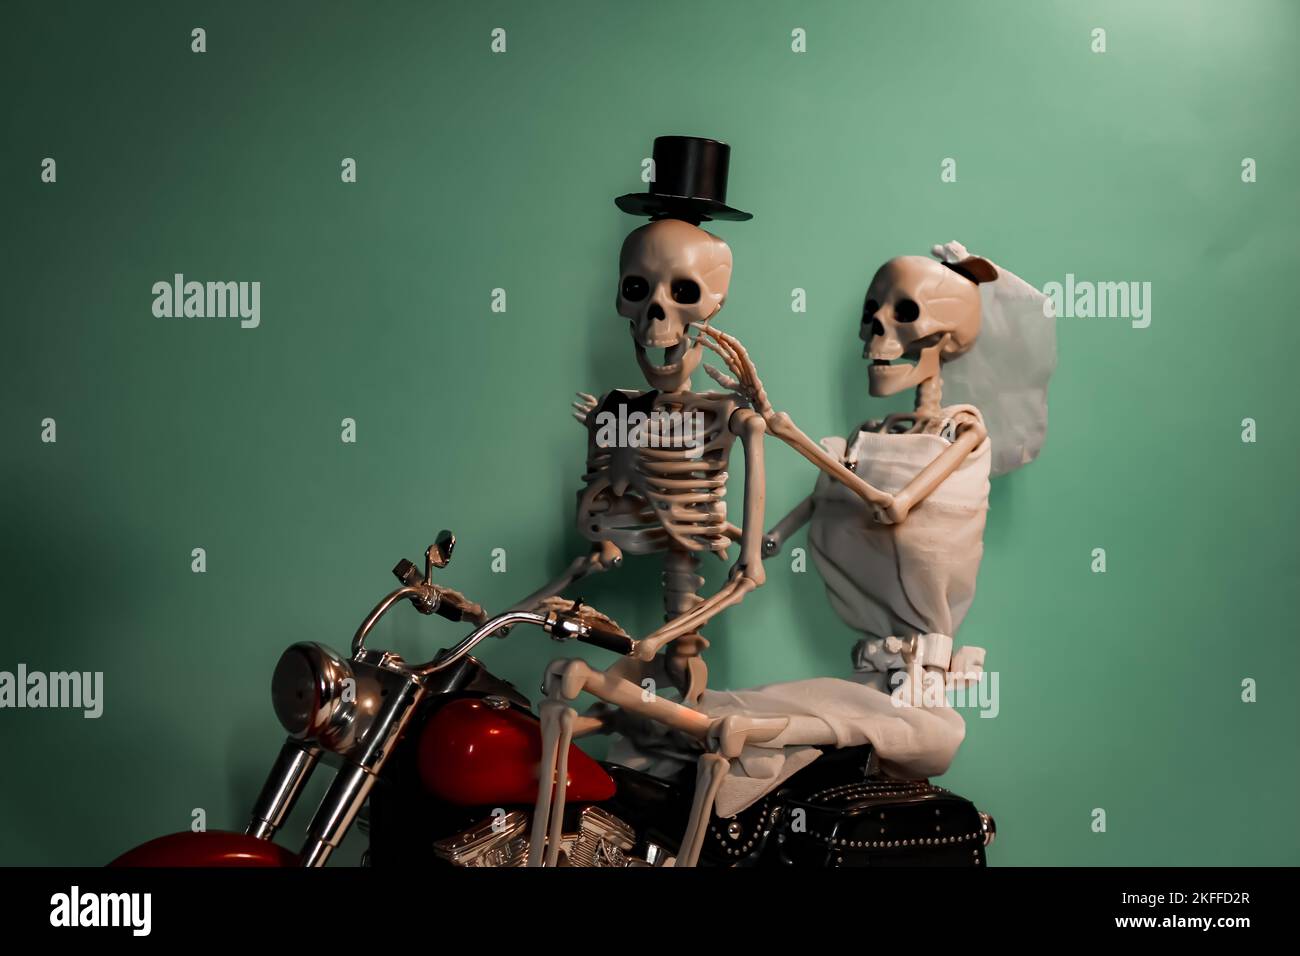 Happily married skeleton couple taking a photo on a motorcycle Stock Photo